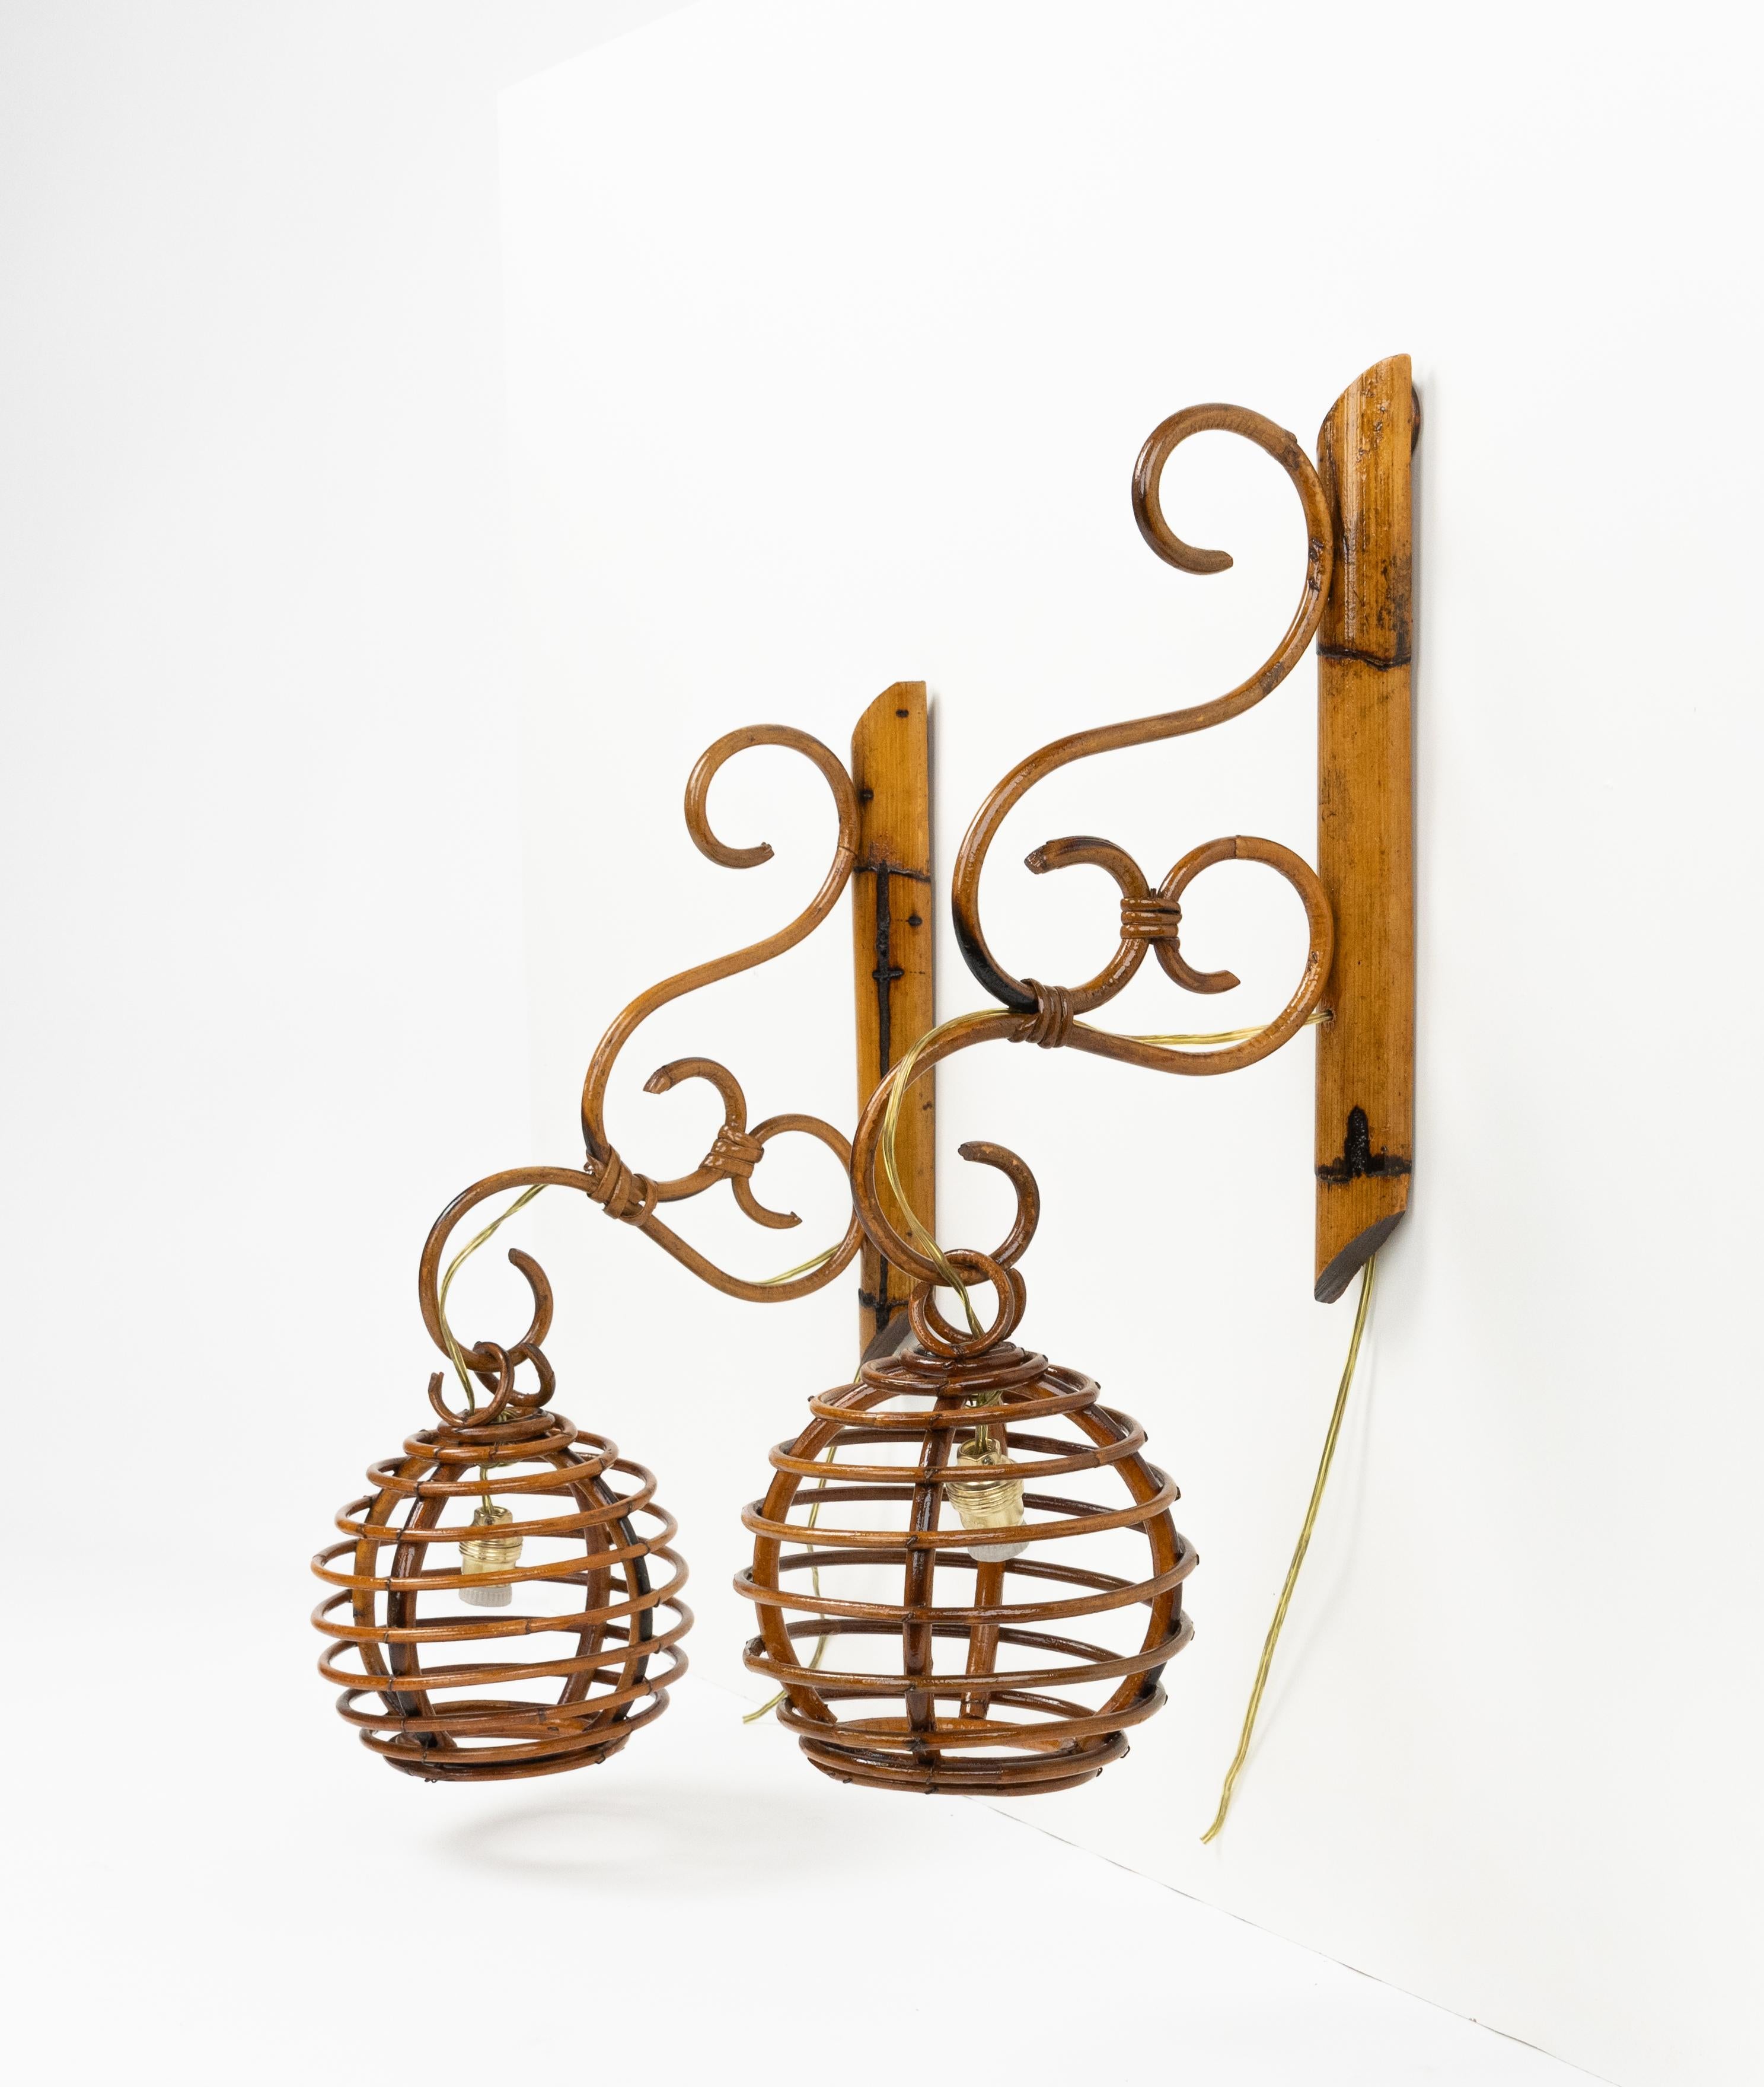 Midcentury Pair of Sconces in Bamboo and Rattan Louis Sognot Style, Italy 1960s For Sale 6